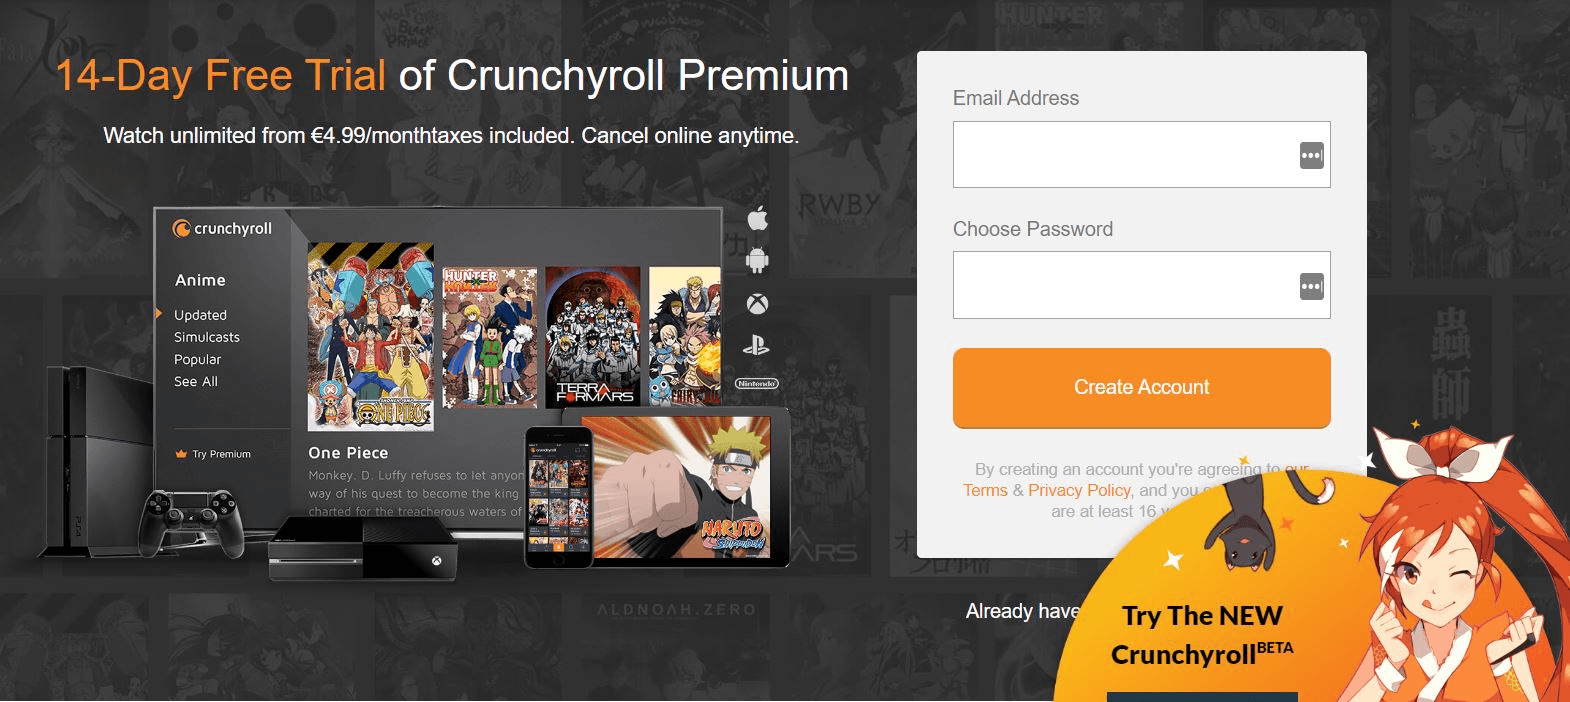 14 day Crunchyroll free trial is available for those who want to try before they buy!